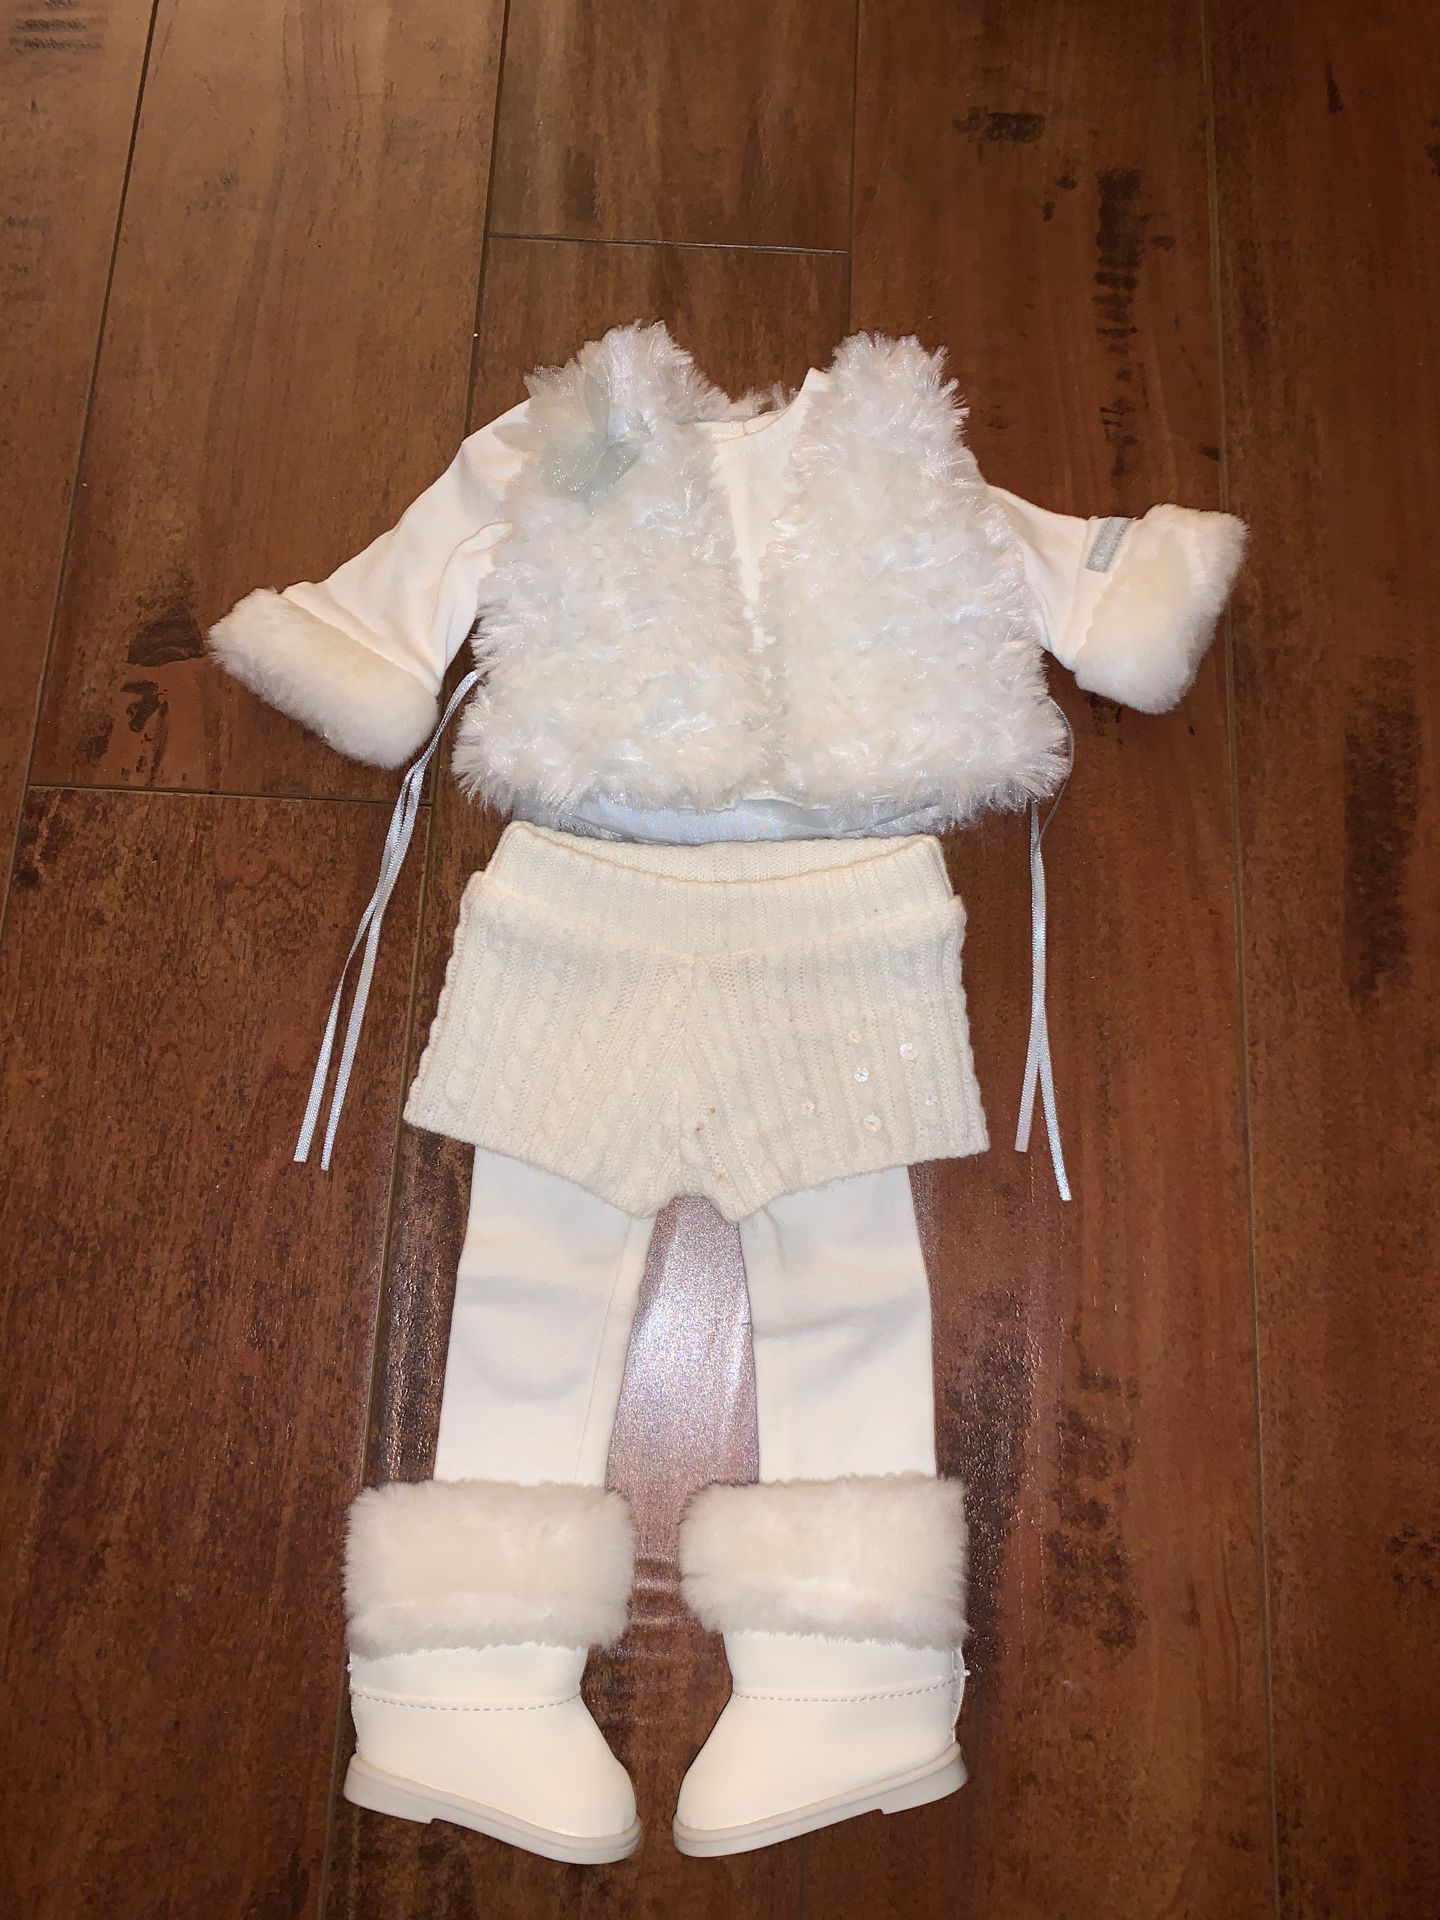 American Girl Doll - Winter White Outfit